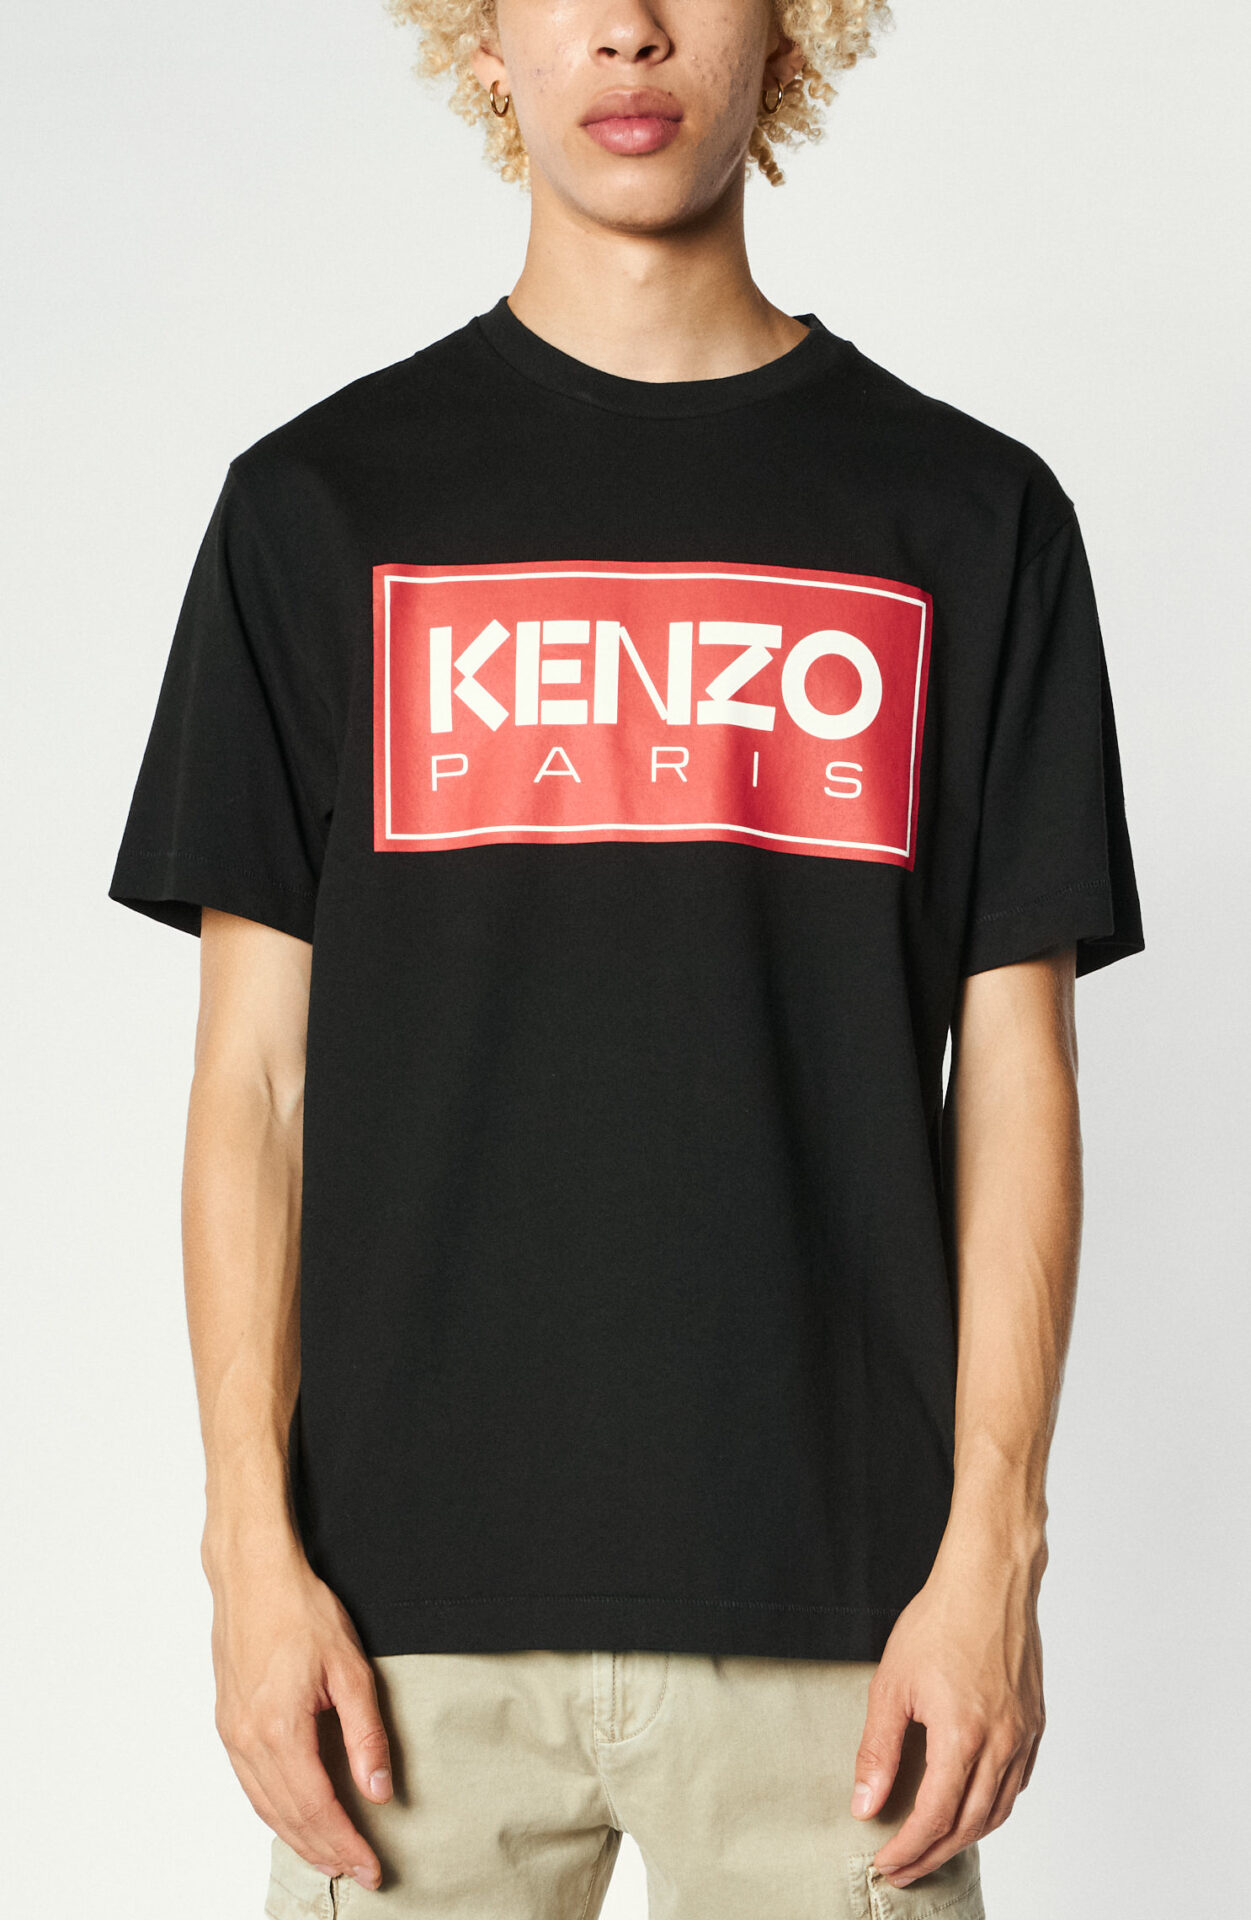 rulle Tag ud Ruddy KENZO - T-shirt with logo print in black / red - Schwittenberg